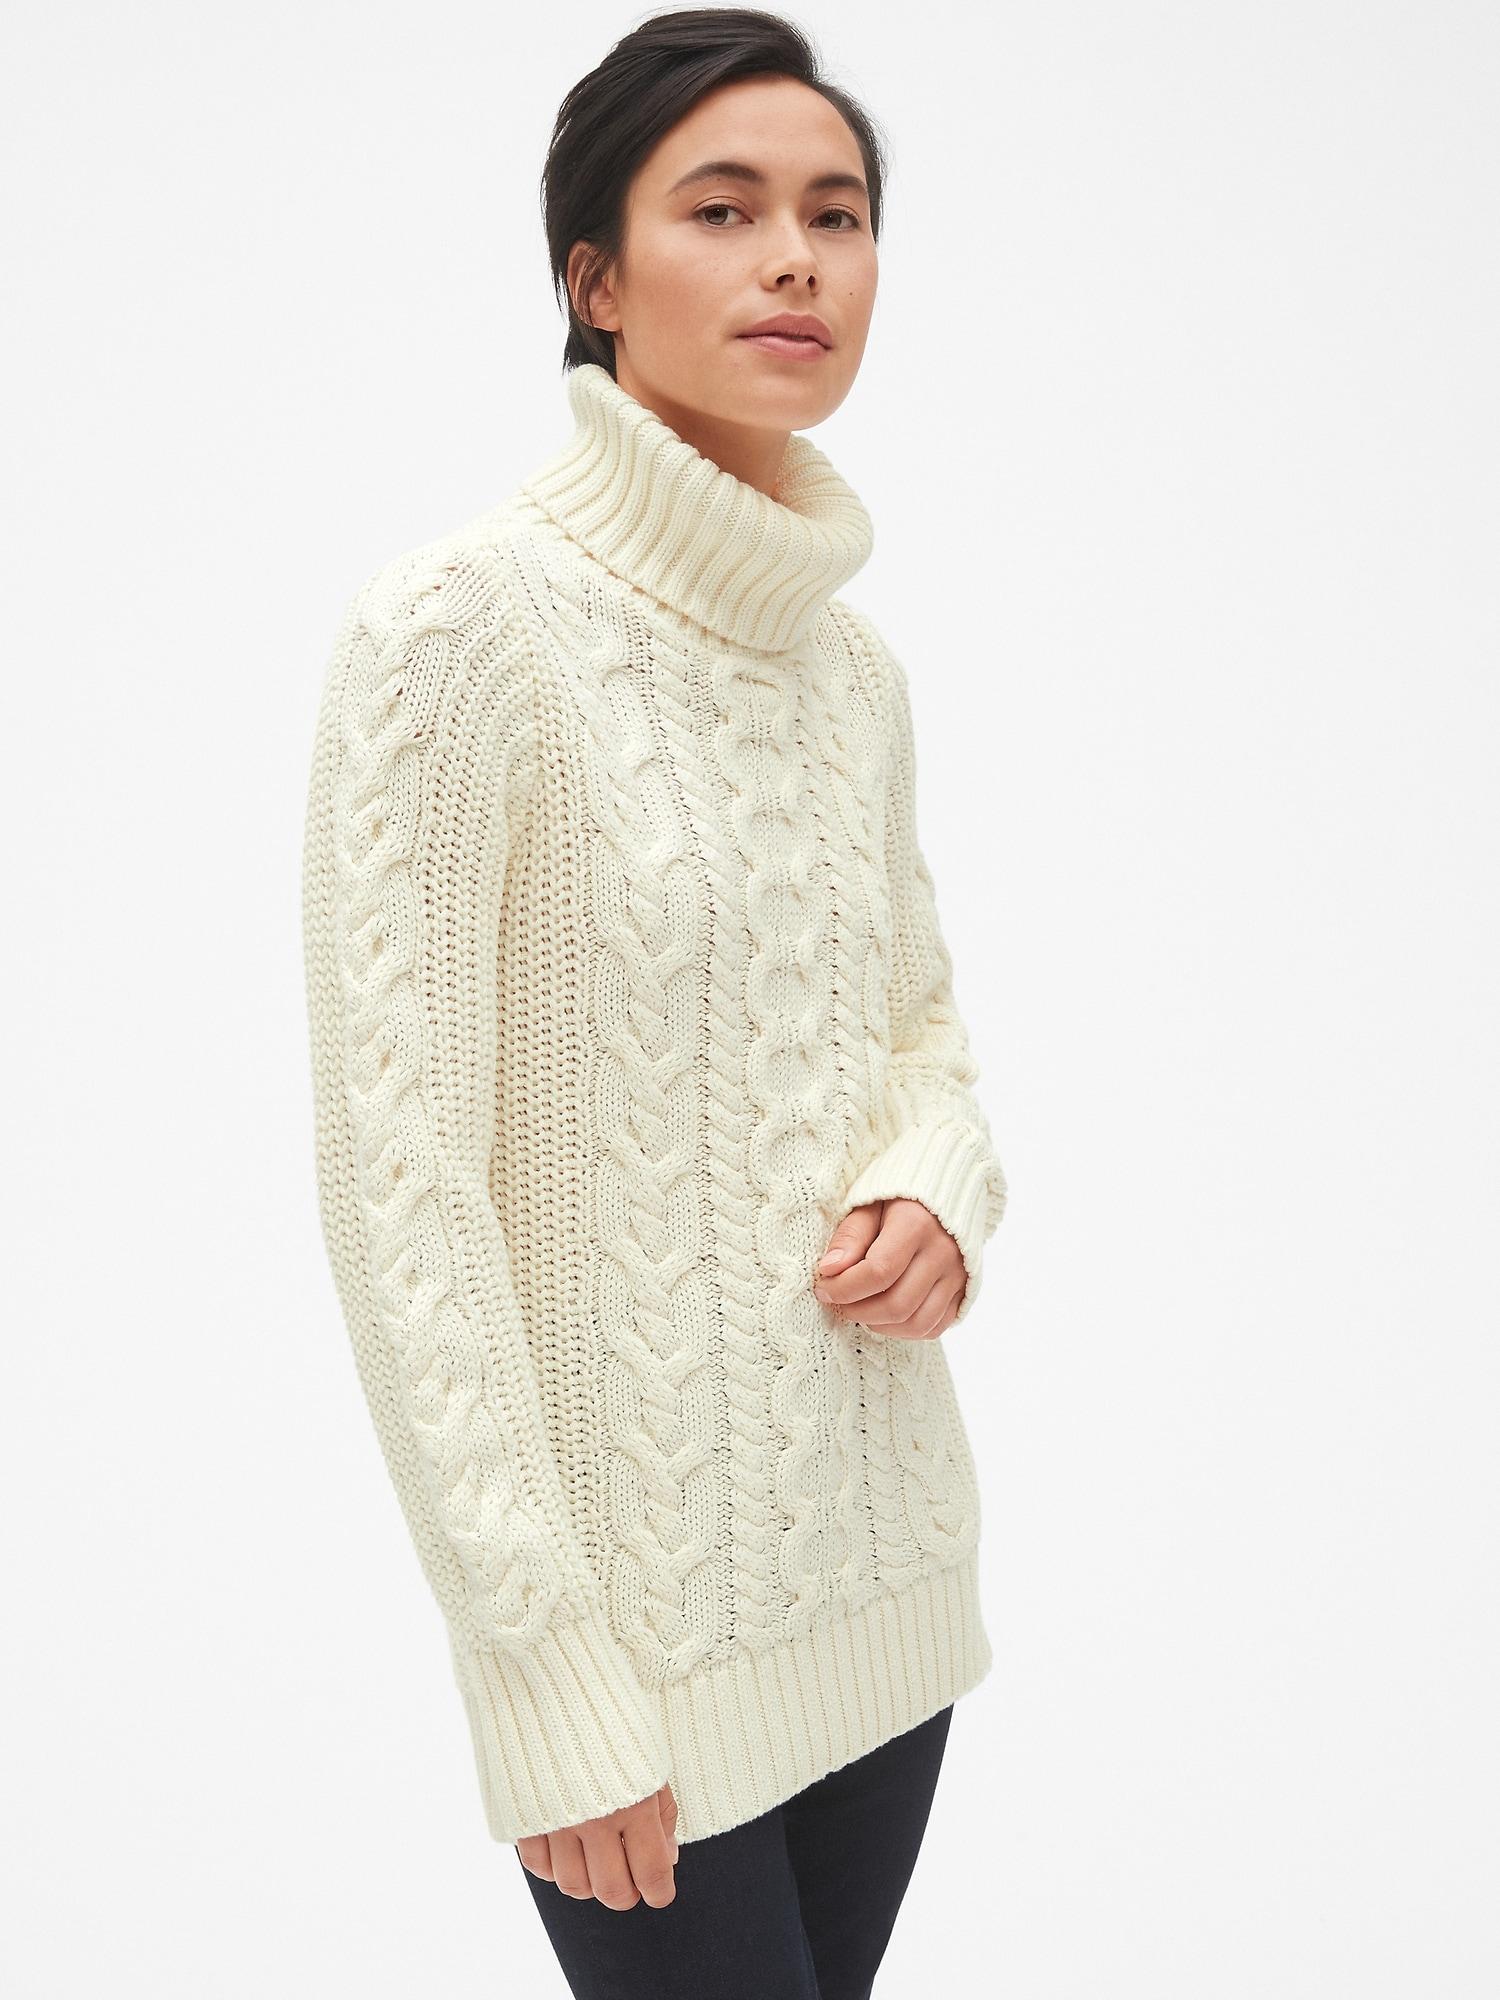 Gap Cotton Cableknit Turtleneck Tunic Sweater in White Lyst